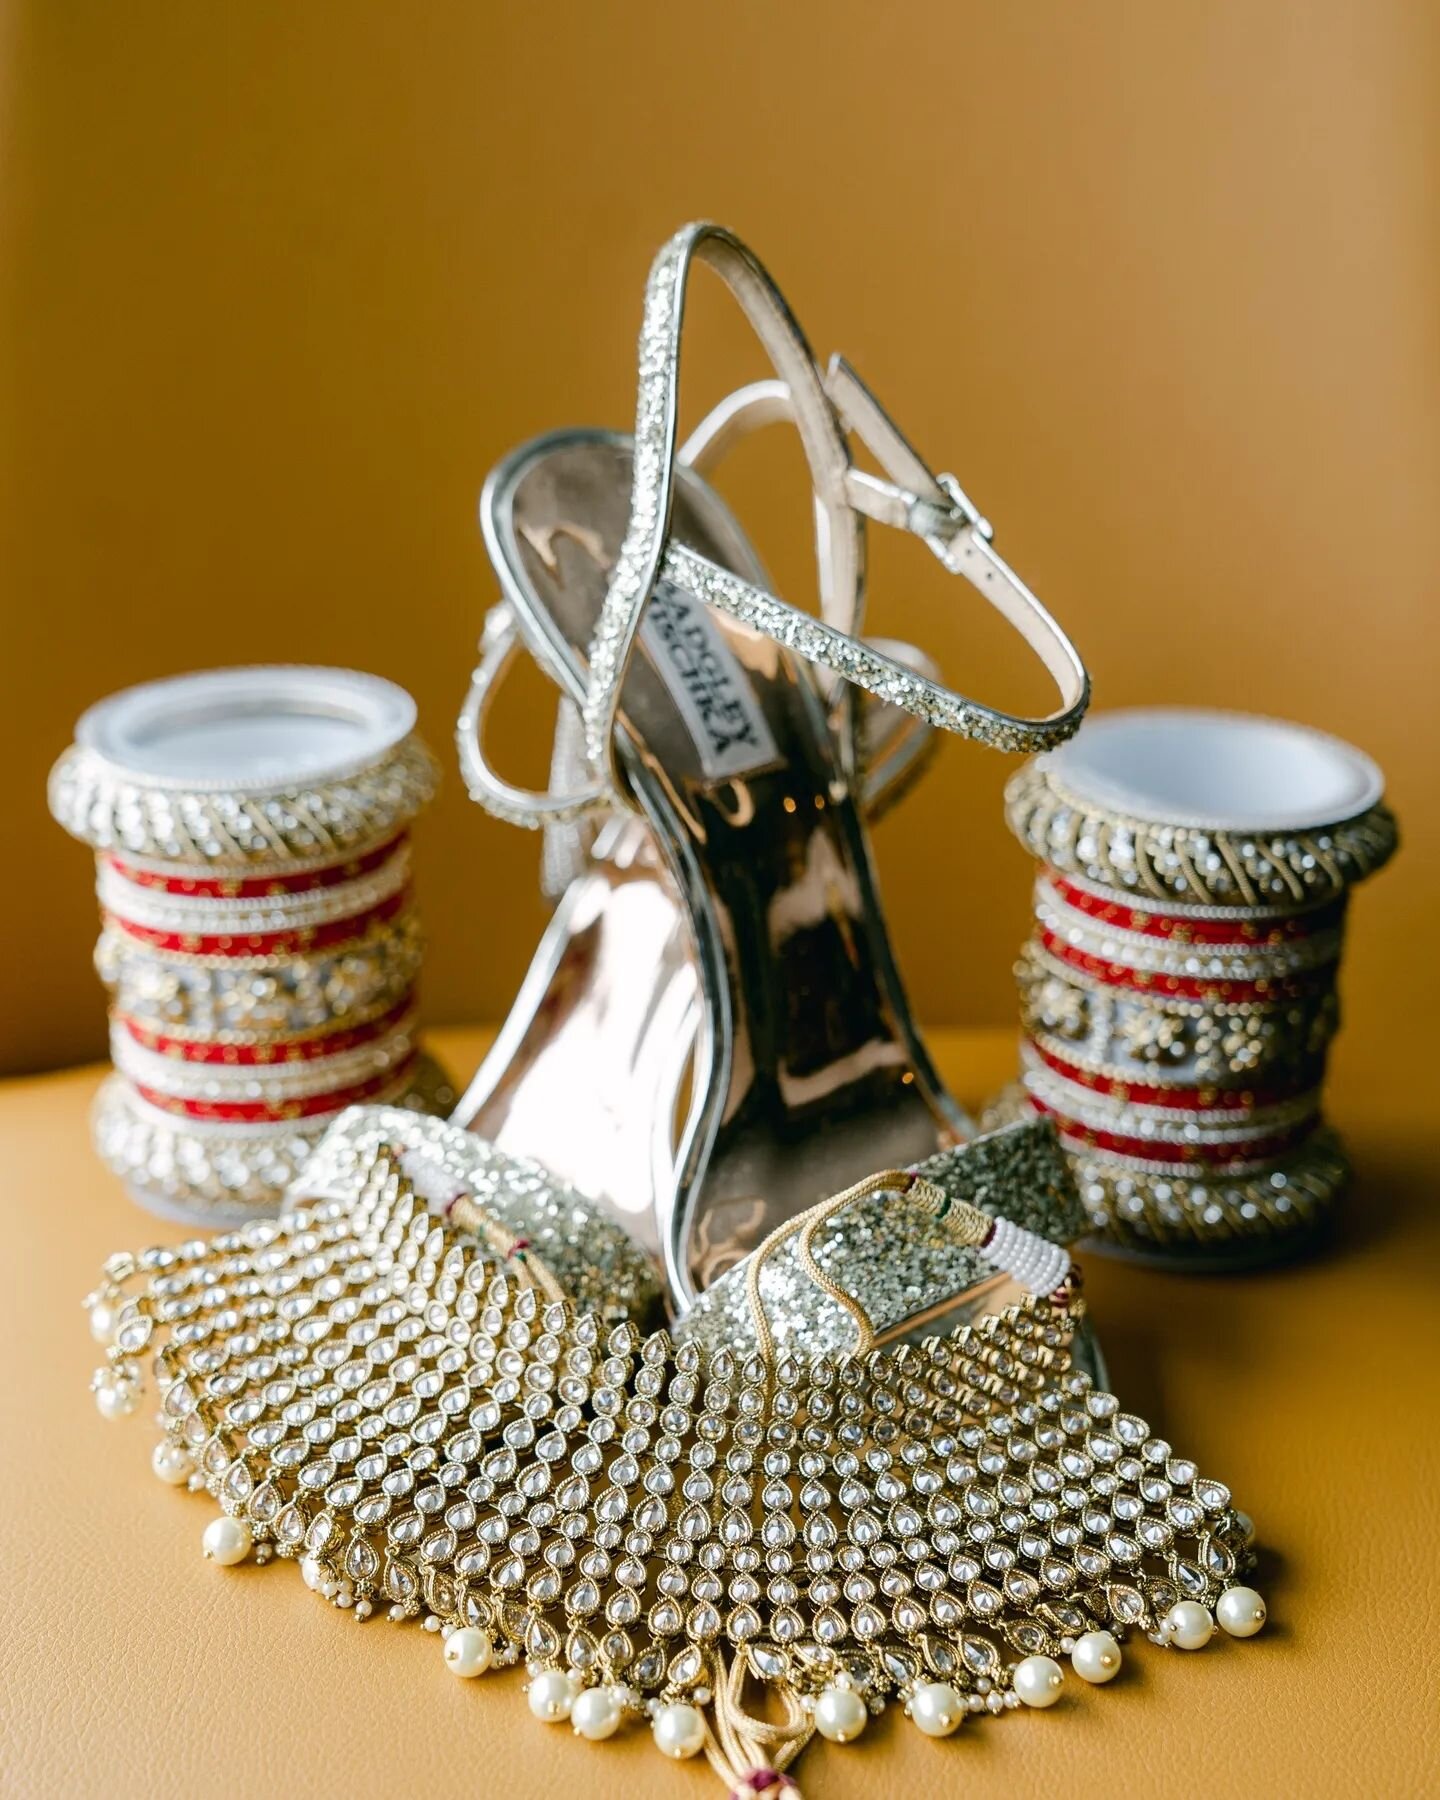 Diving into the pretty little things that made the big day sparkle ✨👰 ⁠
⁠
#WeddingDetails #BridalBliss #AllAboutTheDetails ⁠
#bostonwedding #bostonweddingphotographer ⁠
#indianwedding #desiwedding #indianweddingphotographer #IndianWeddings #indianwe